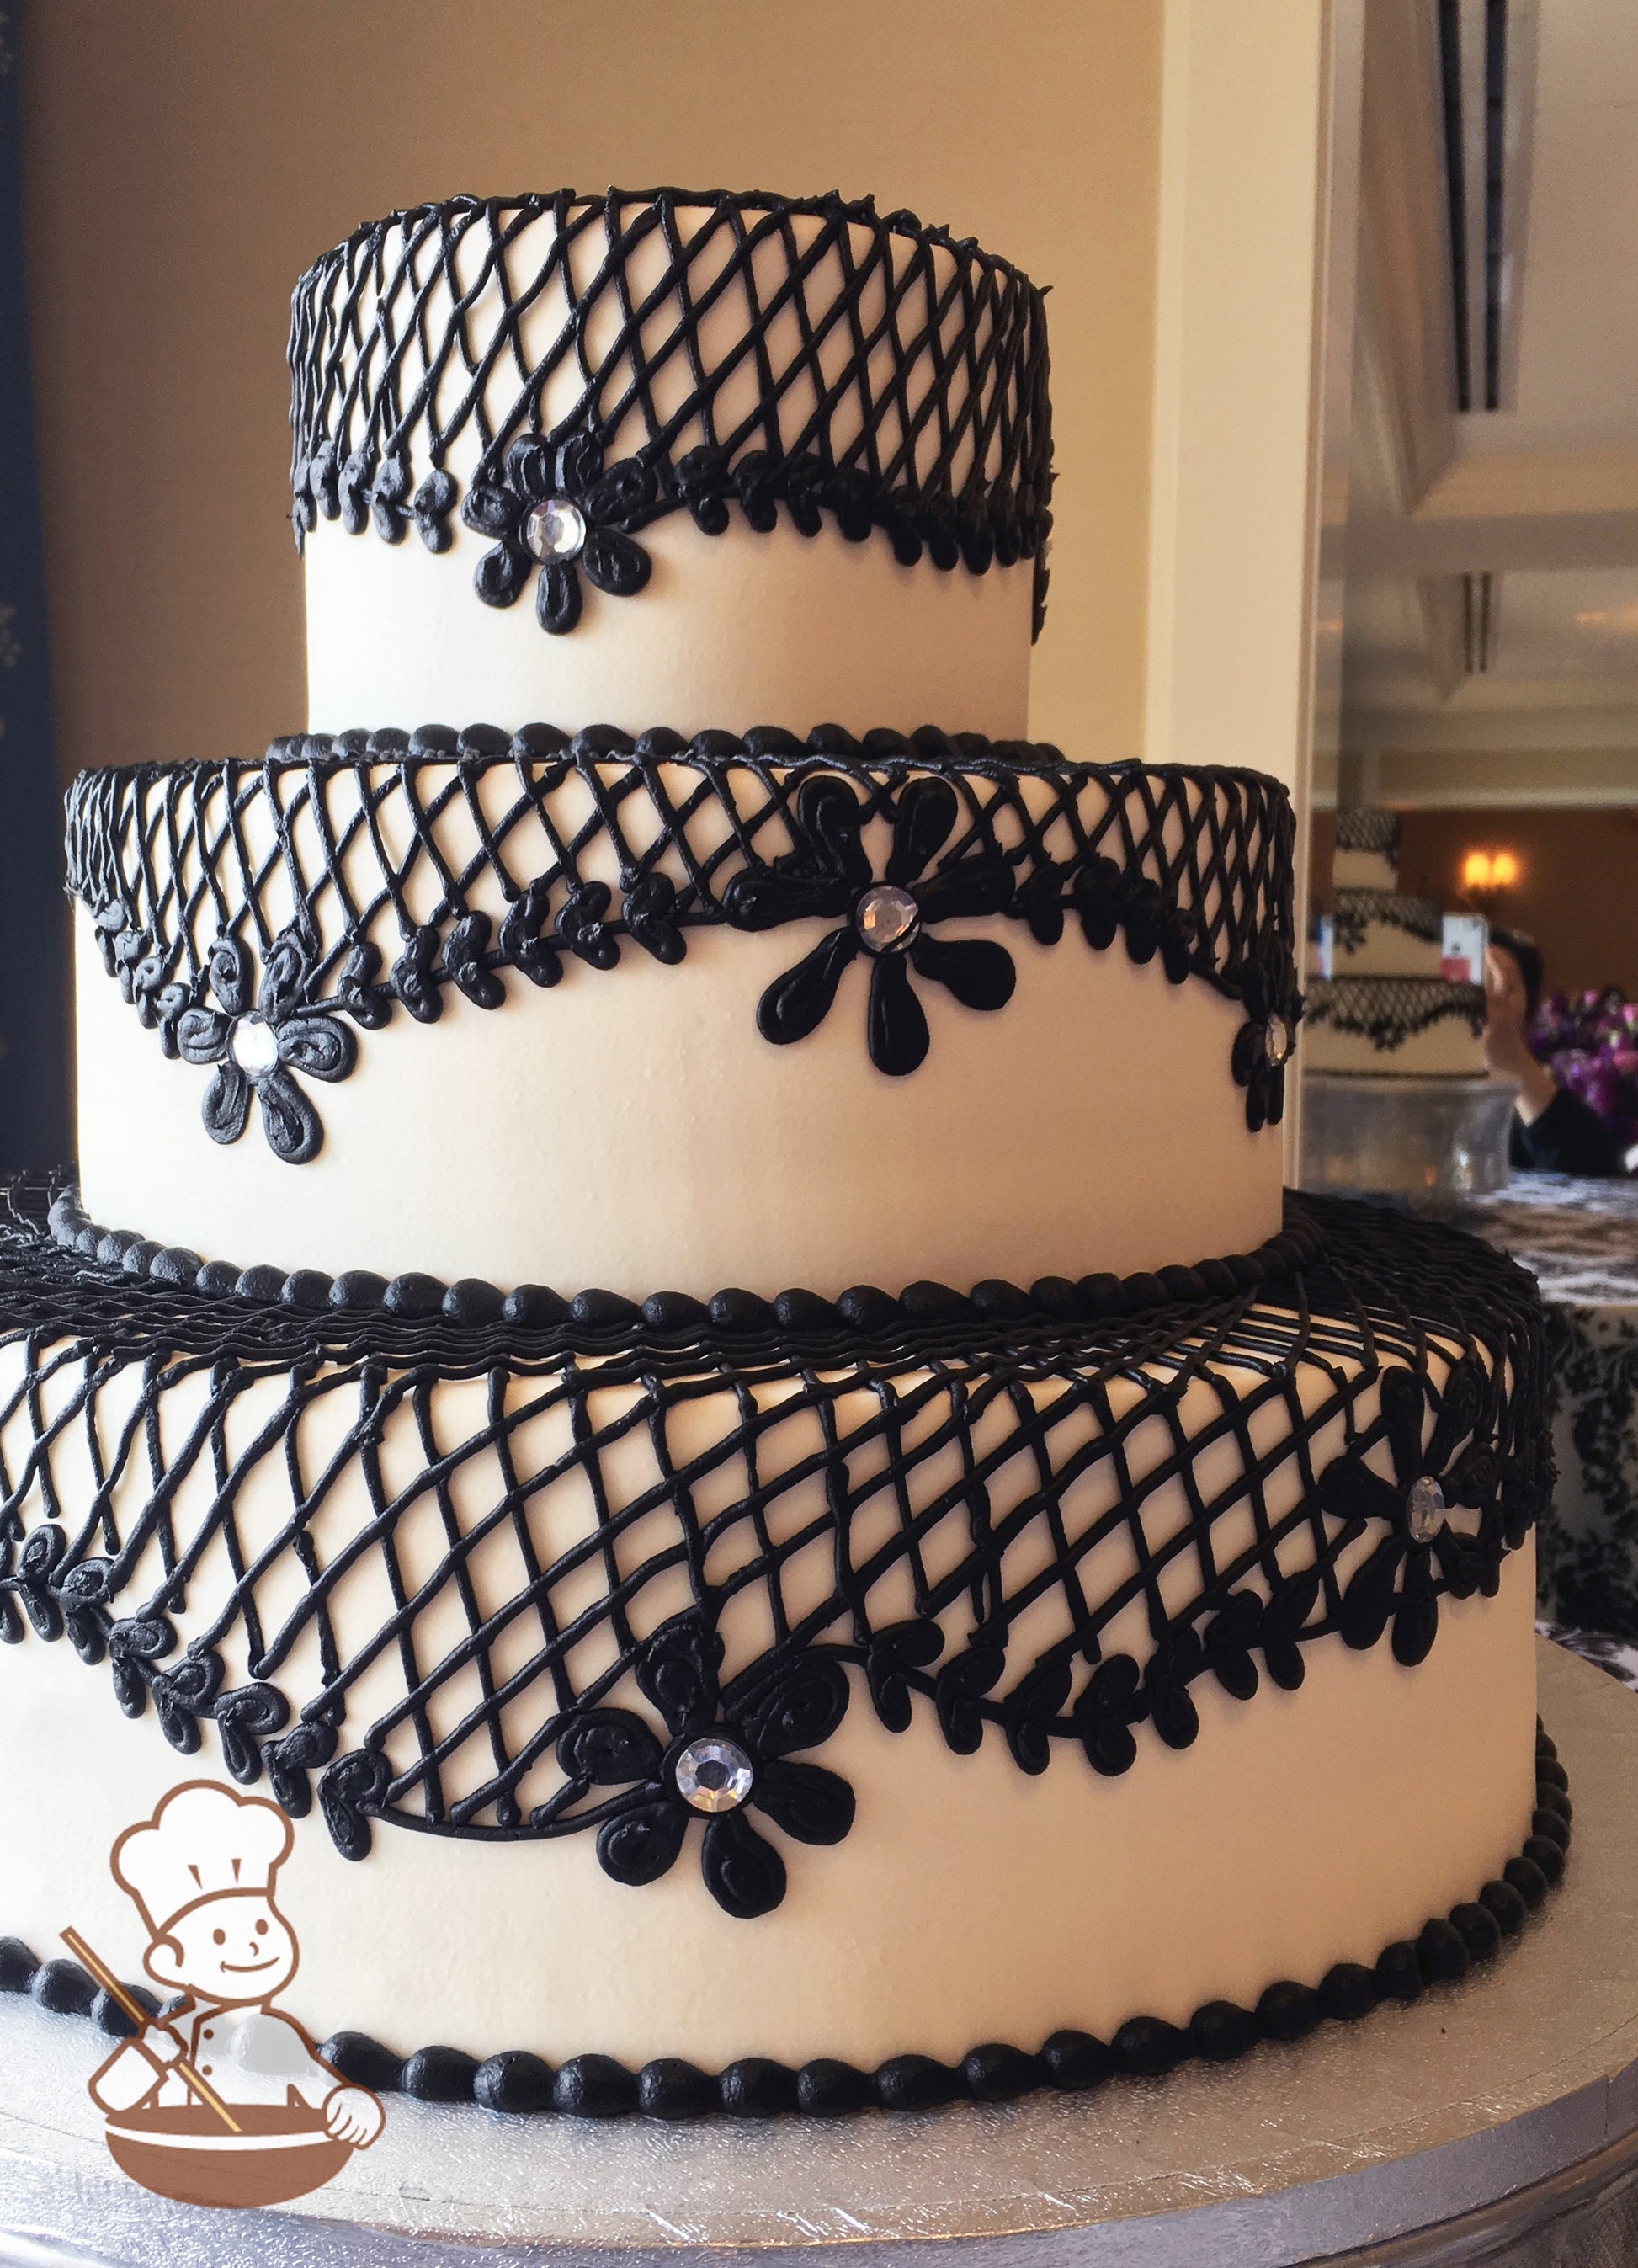 3 tier buttercream wedding cake with black lace and heart shaped vintage piping.  Florals with rhinestone centers for the added design.